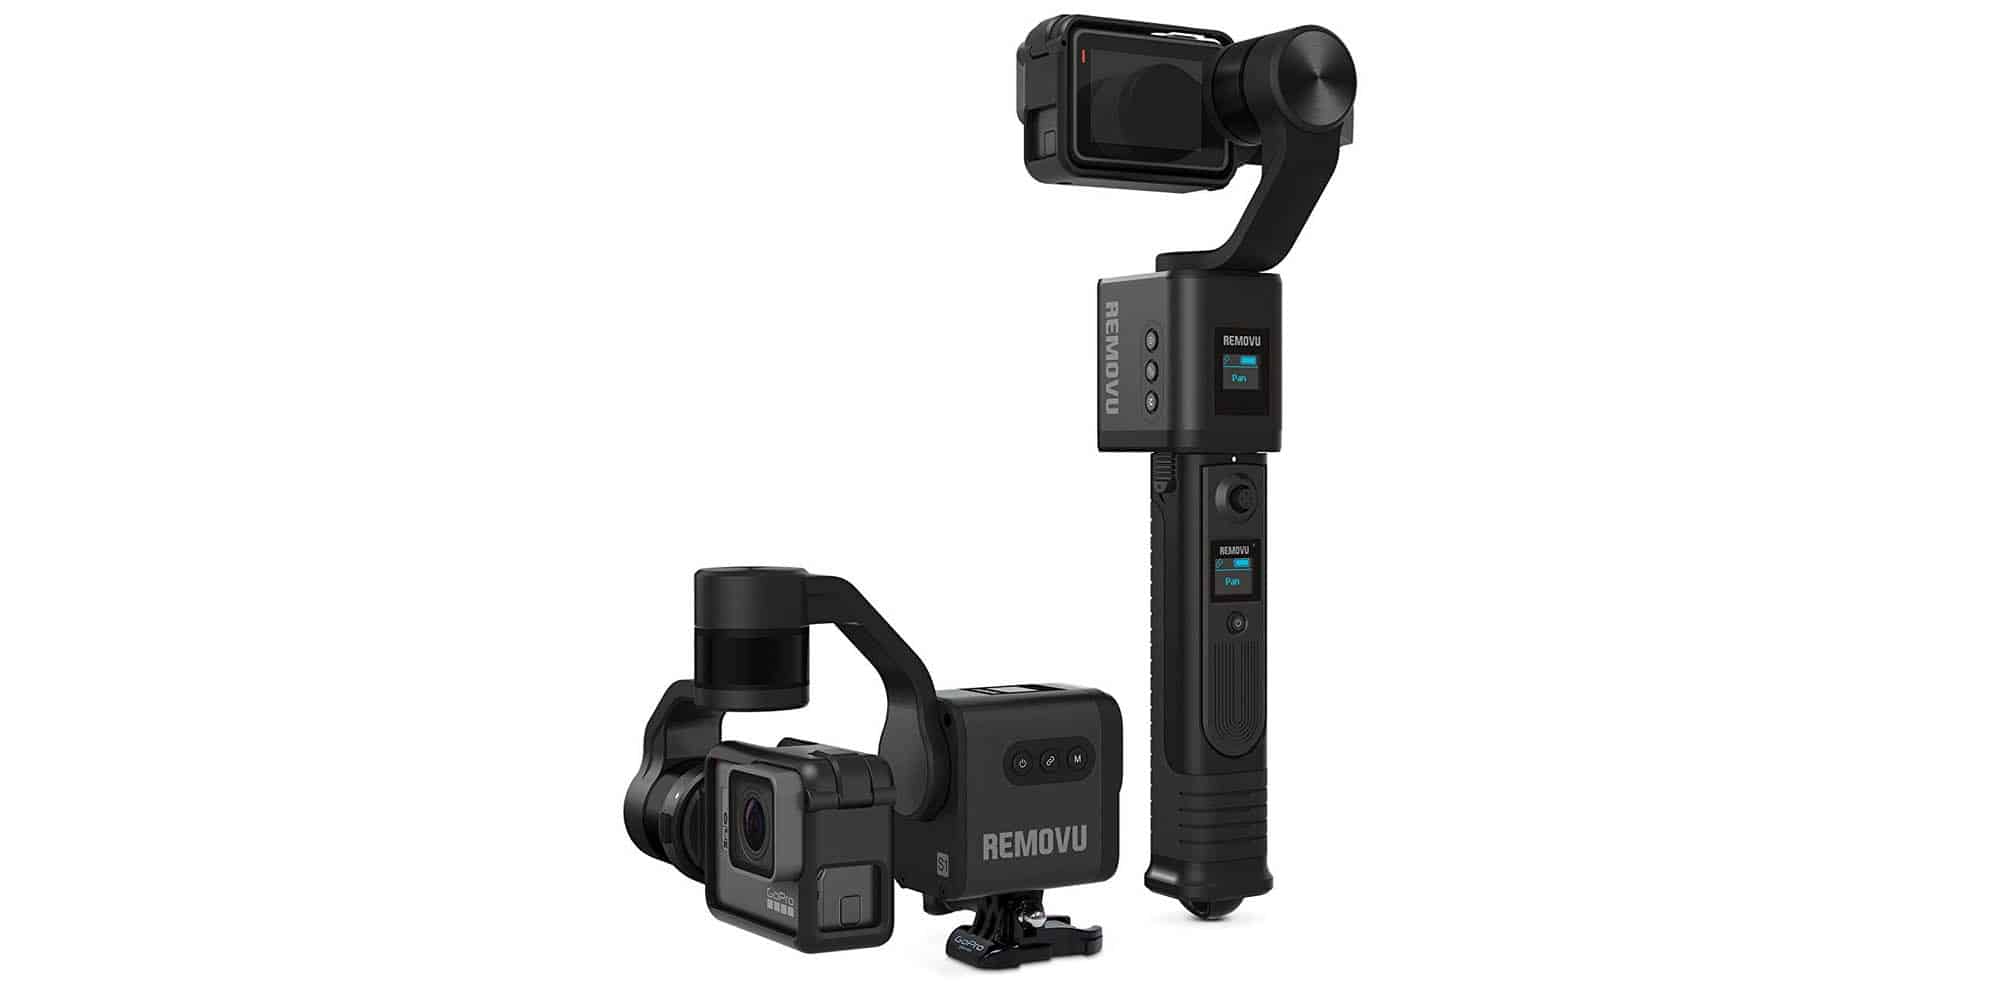 featured image for removu s1 gimbal review